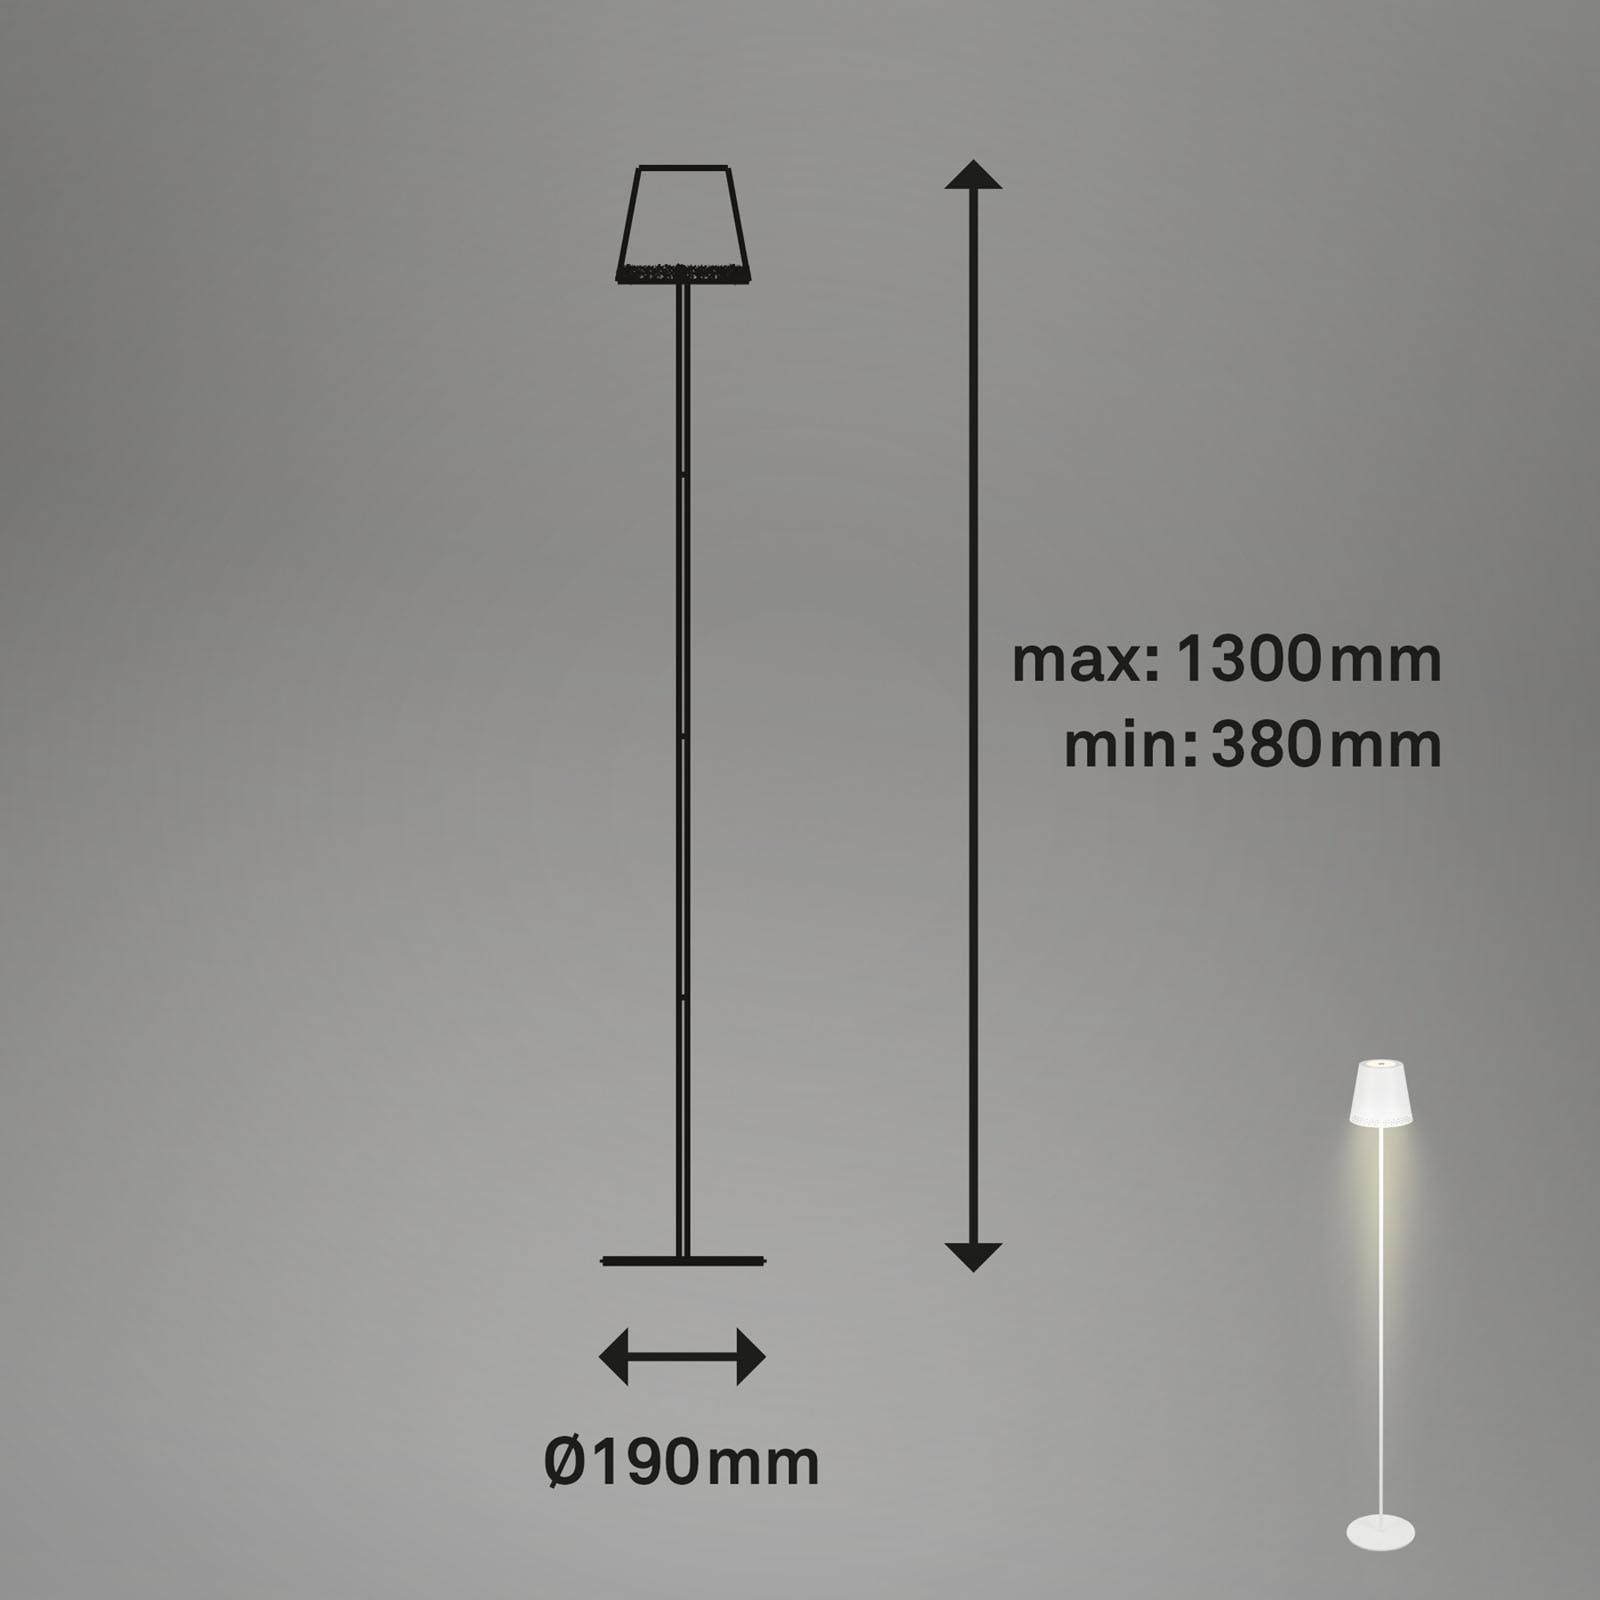 Kiki LED floor lamp with rechargeable battery, 2,700K, white